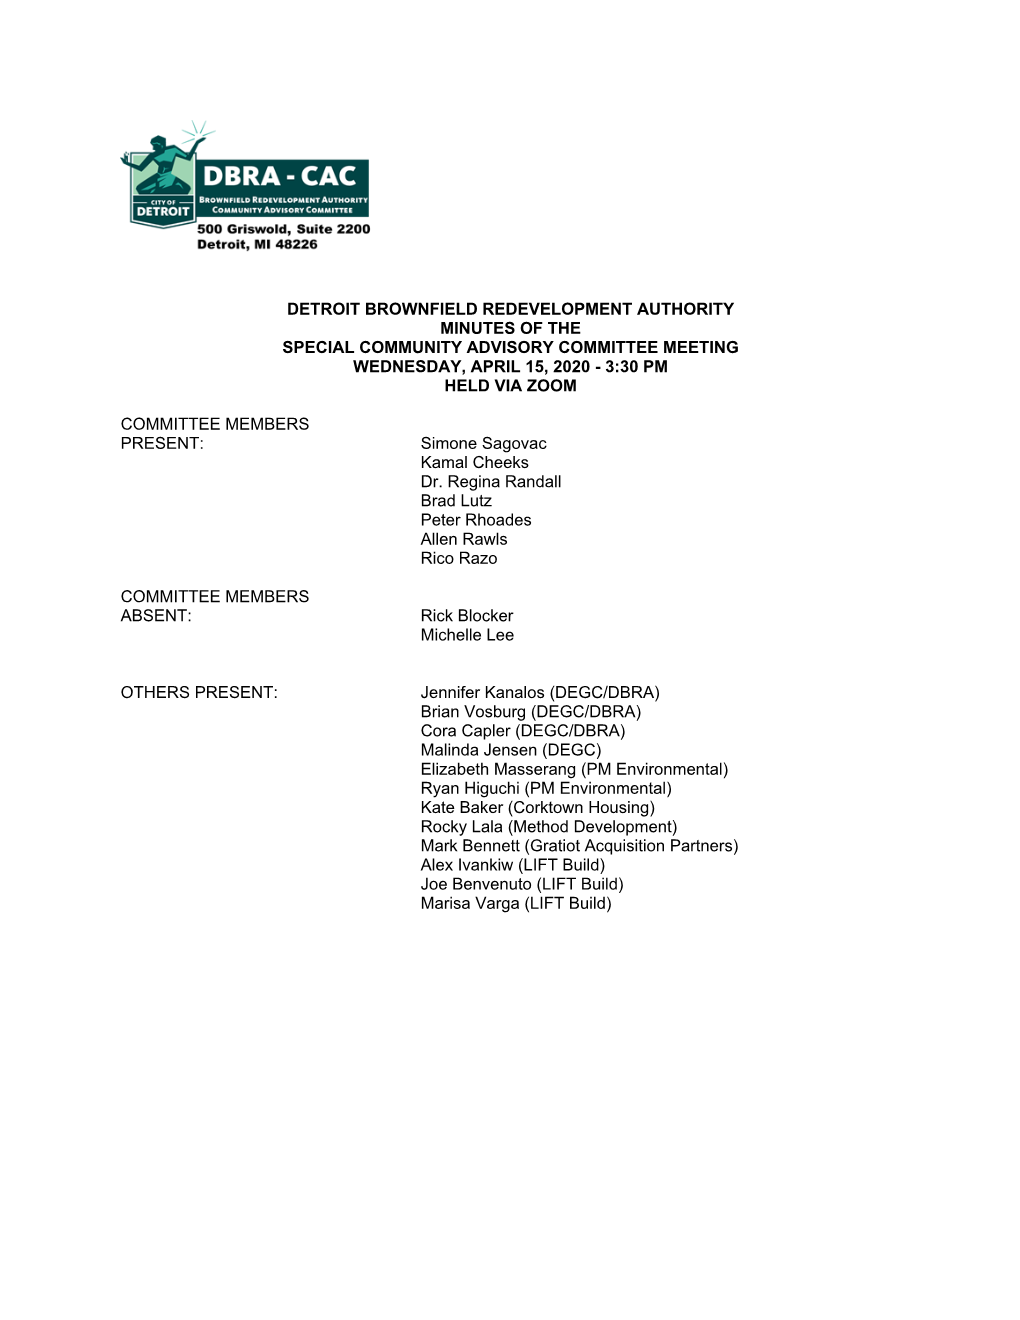 Detroit Brownfield Redevelopment Authority Minutes of the Special Community Advisory Committee Meeting Wednesday, April 15, 2020 - 3:30 Pm Held Via Zoom